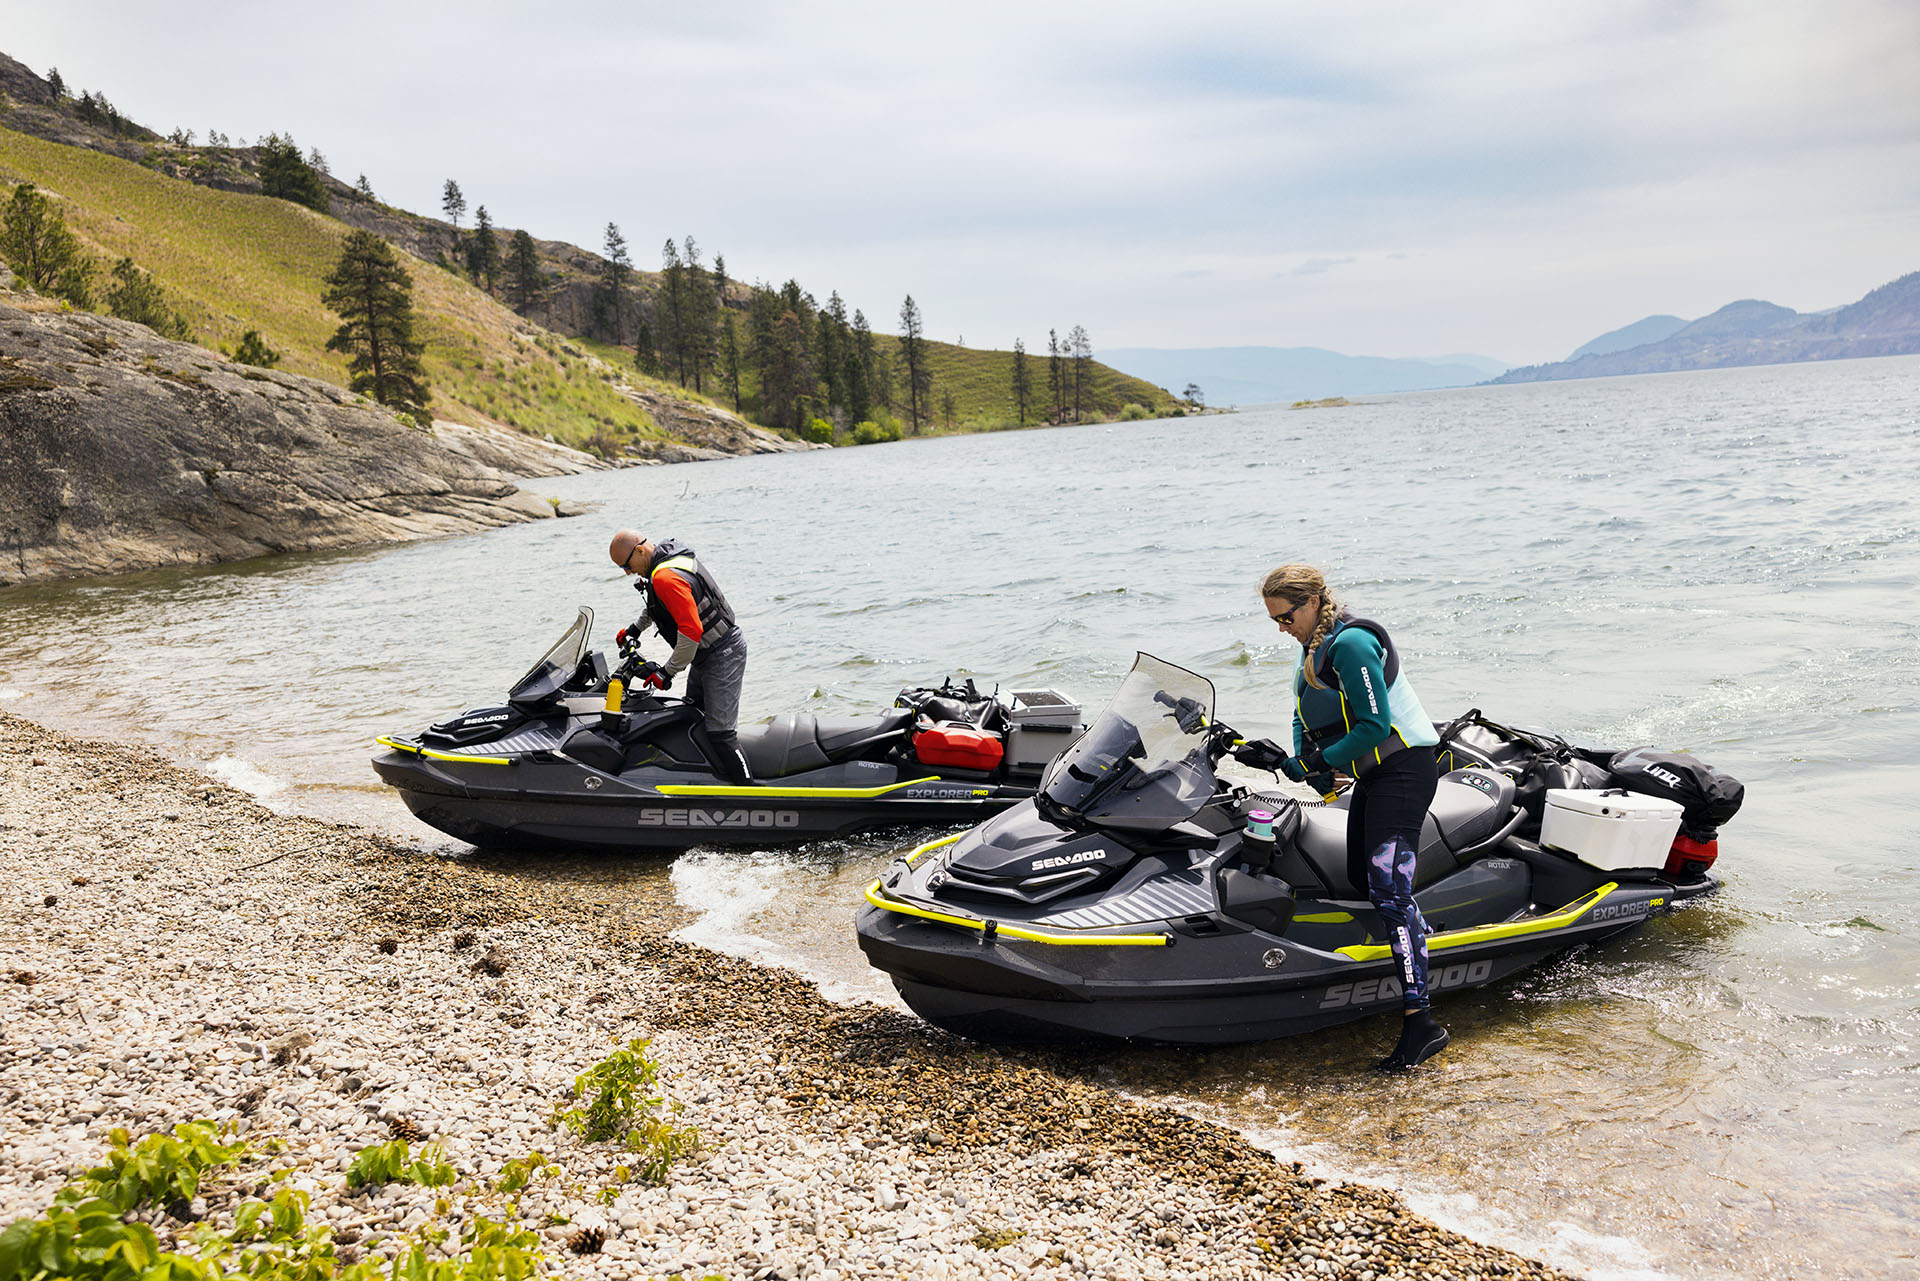 Discover the Sea-Doo lineup with A&E Motorsports